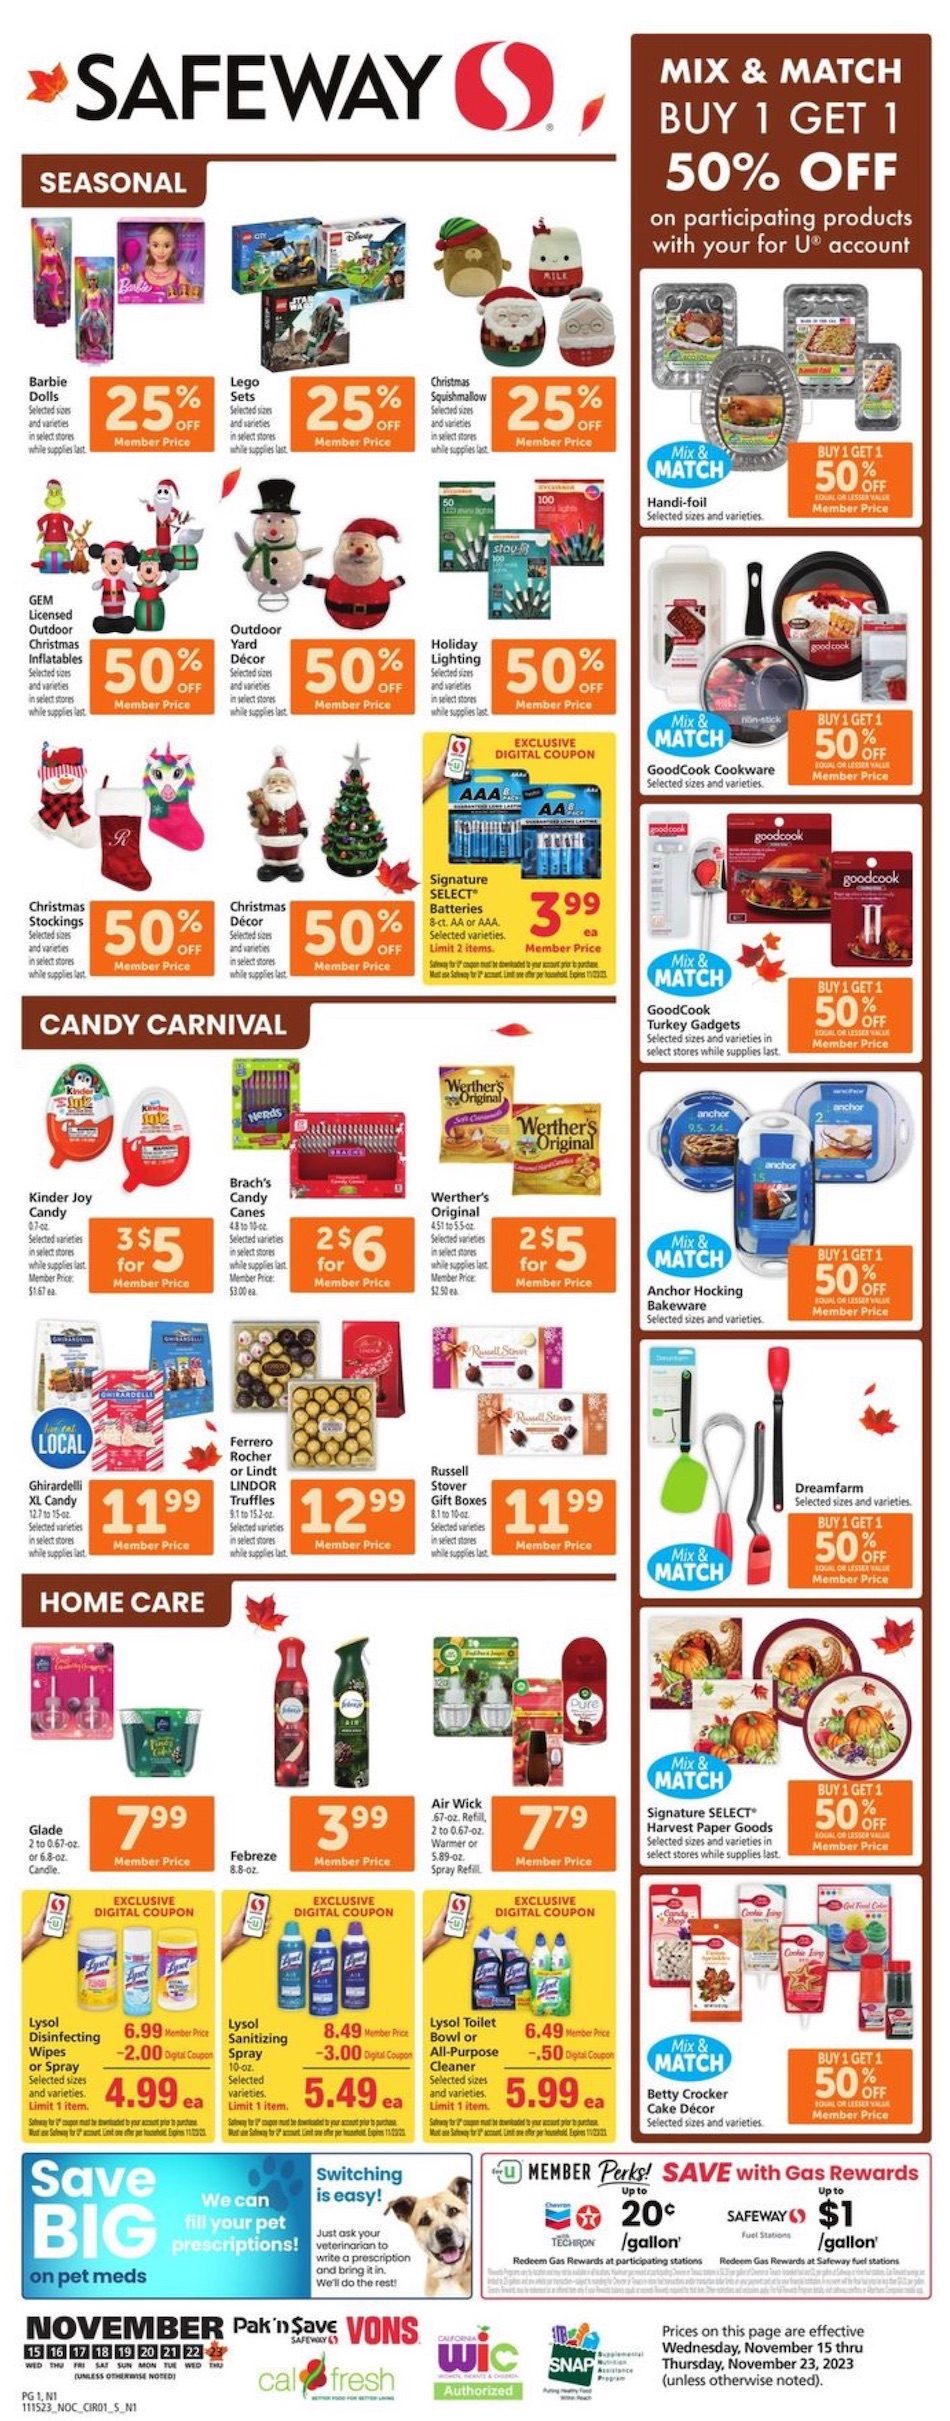 Safeway Weekly Ad Home and Health 15 Nov 2023 Page 1